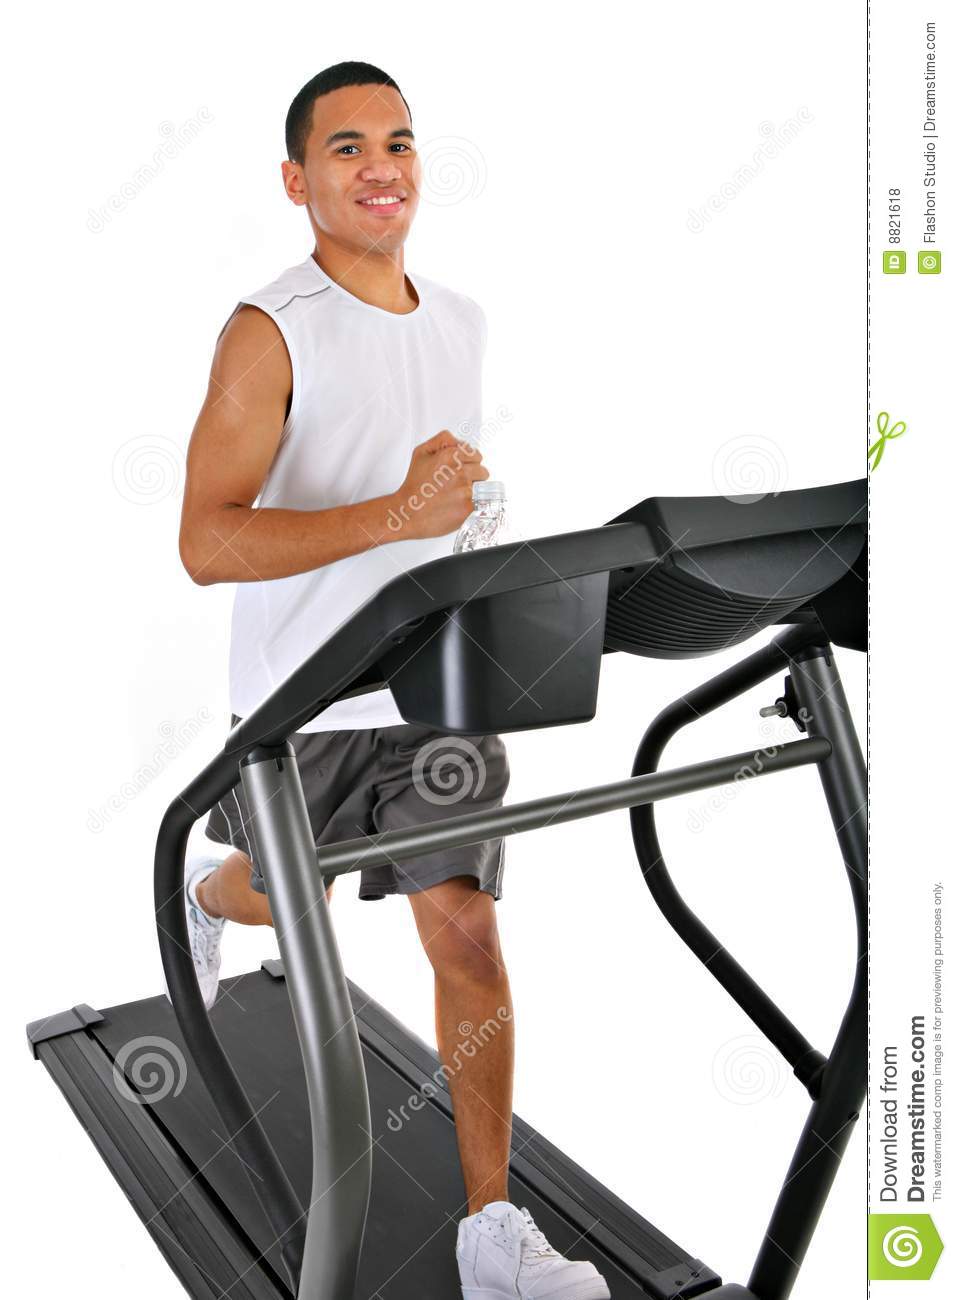 Man On Treadmill Clipart Healthy Young Man Running In